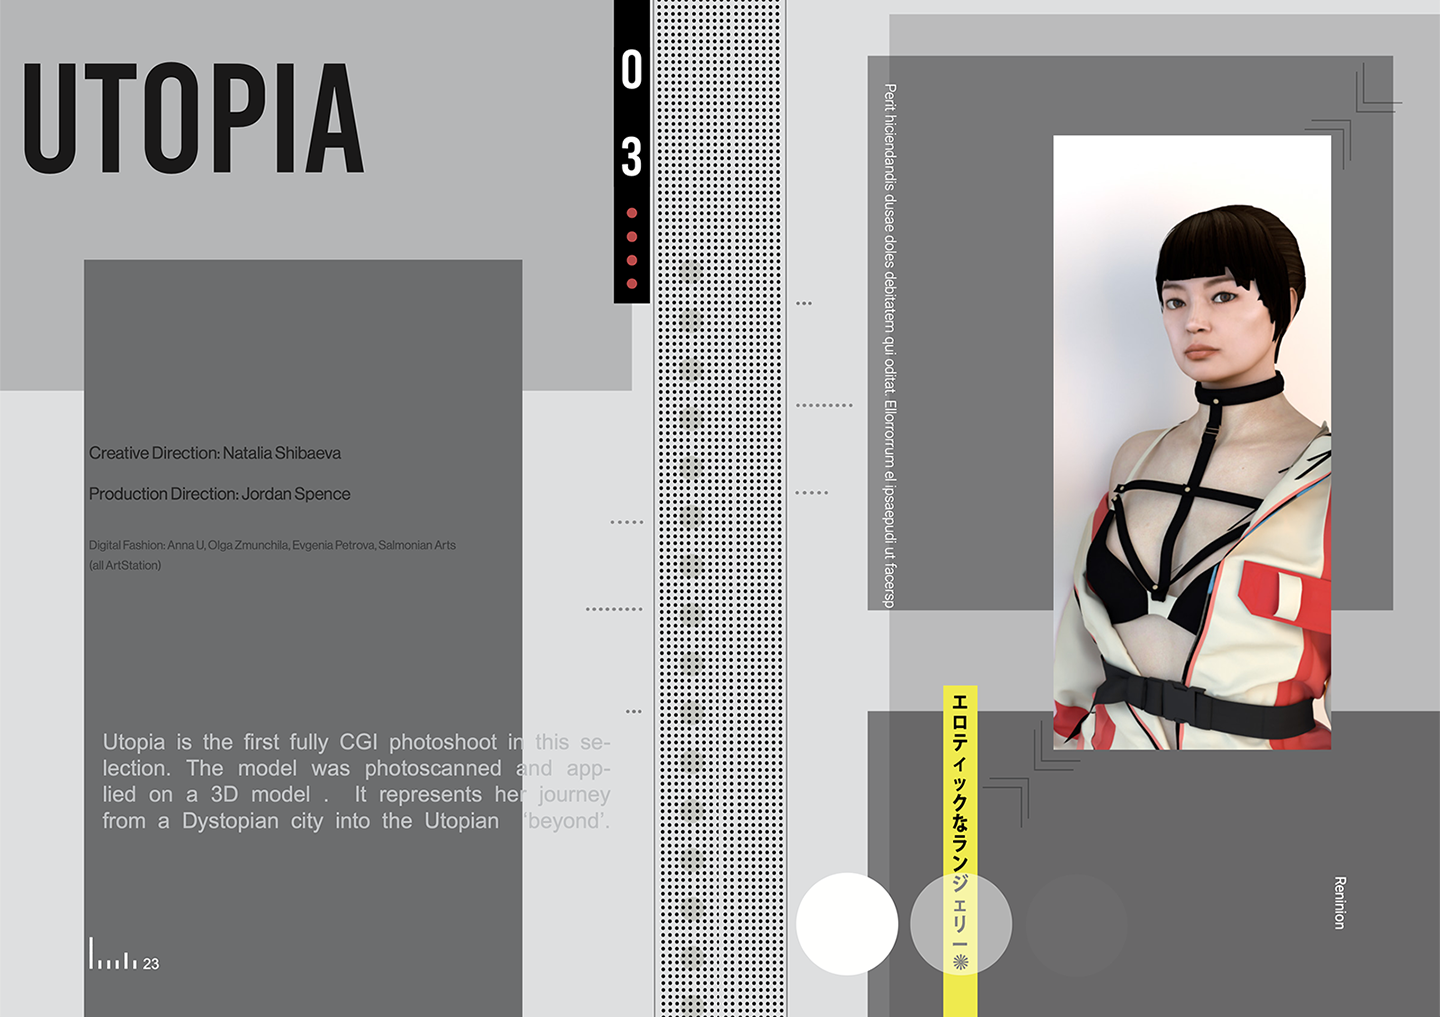 Utopia editorial by Natalia Shibaeva describes a digitalisation journey and how CGI (computer-generated imagery) can be used in fashion shoots